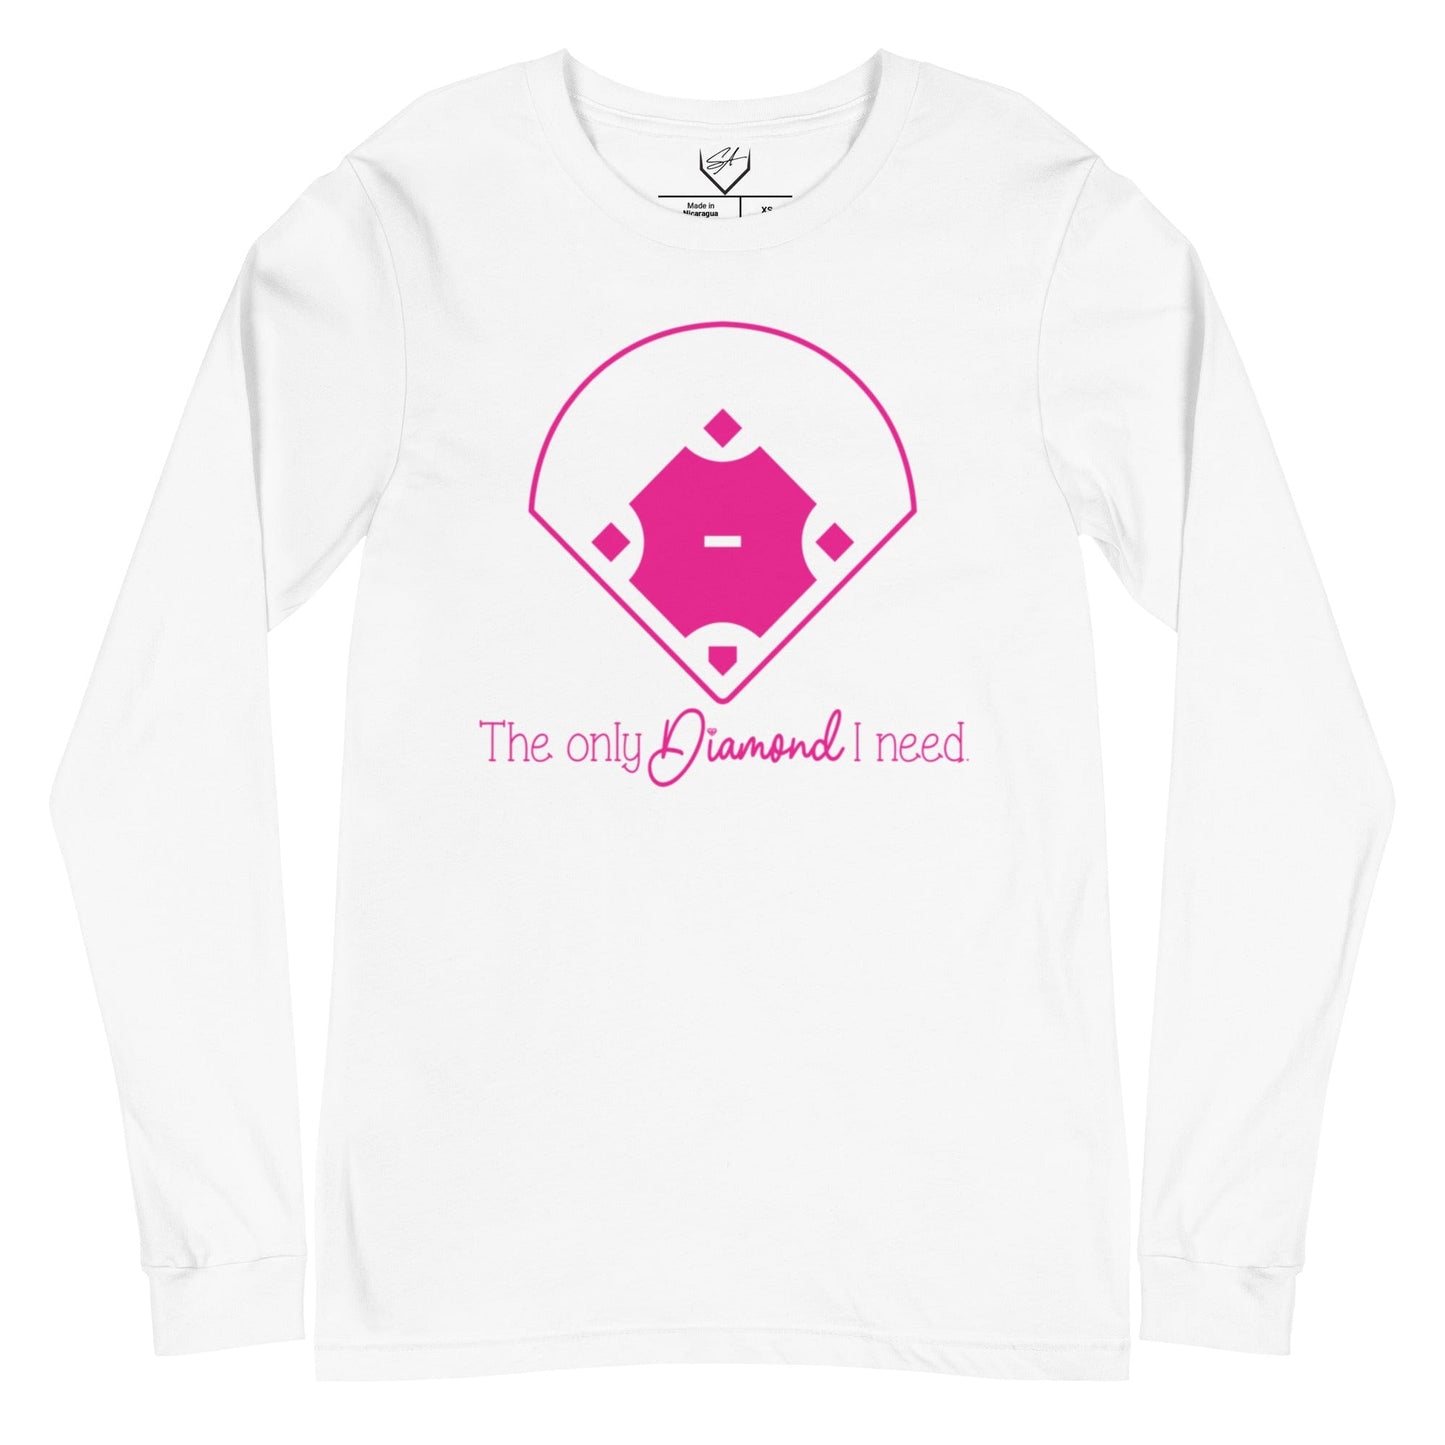 The Only Diamond I Need - Adult Long Sleeve